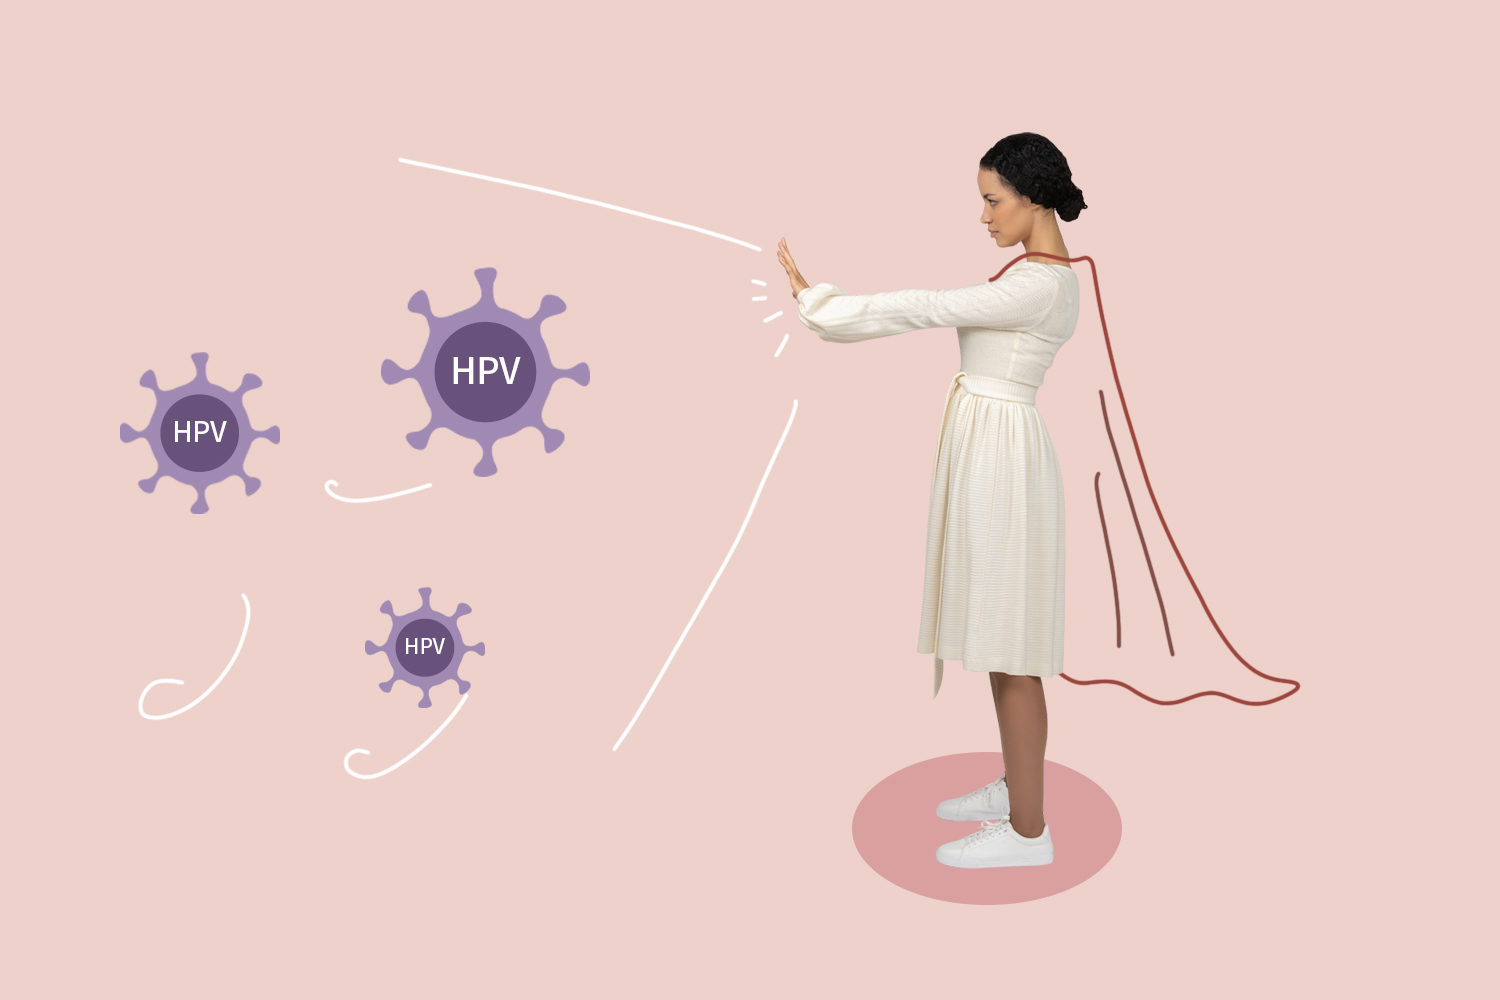 Hpv virus during pregnancy, Hpv virus and getting pregnant